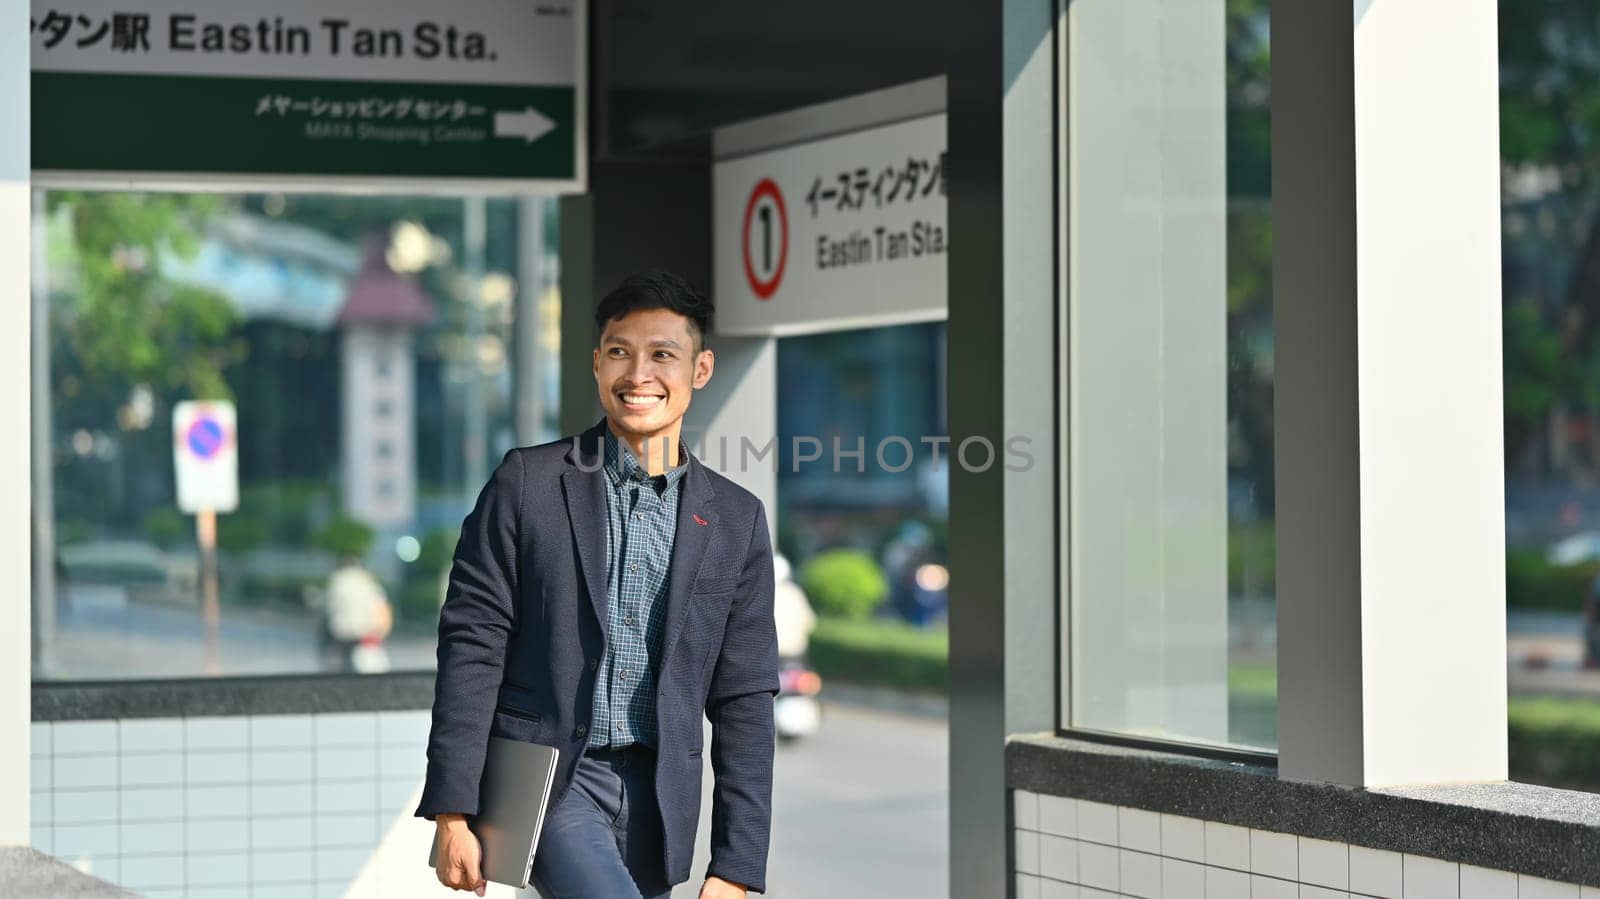 Smiling millennial man in business suit walking in subway station during his morning commute.